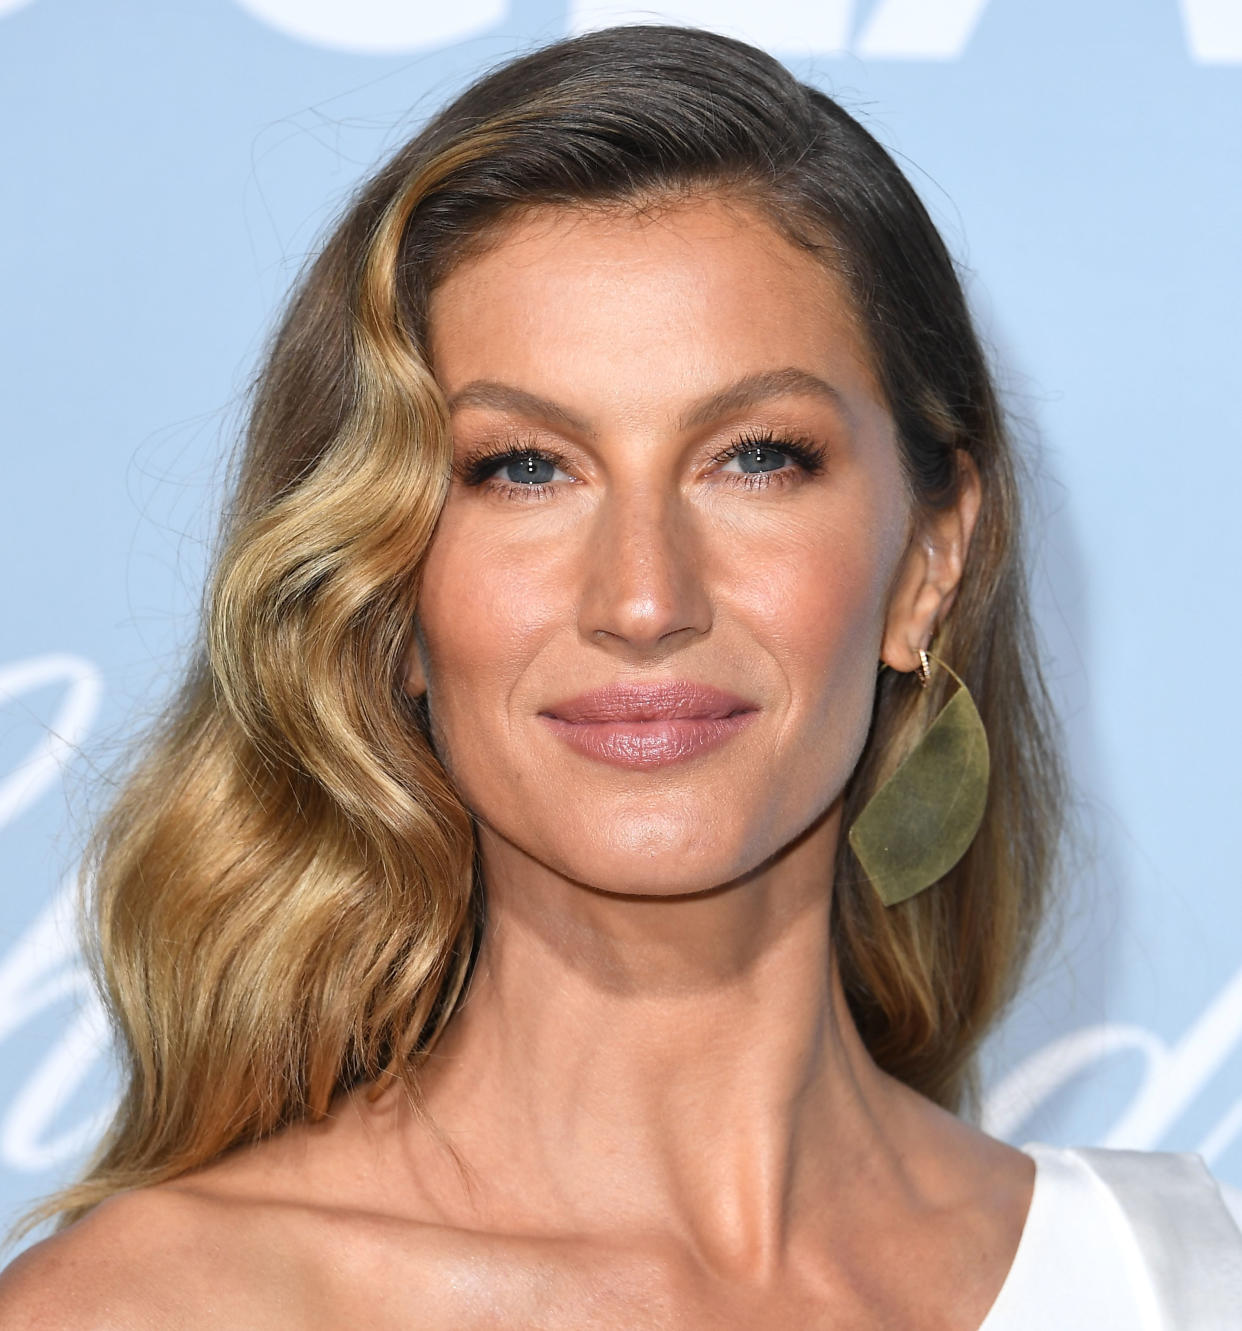 Supermodel Gisele Bündchen, 41, rescued a sea turtle that was trapped in a fishing net on the beach. (Photo: Steve Granitz/WireImage)